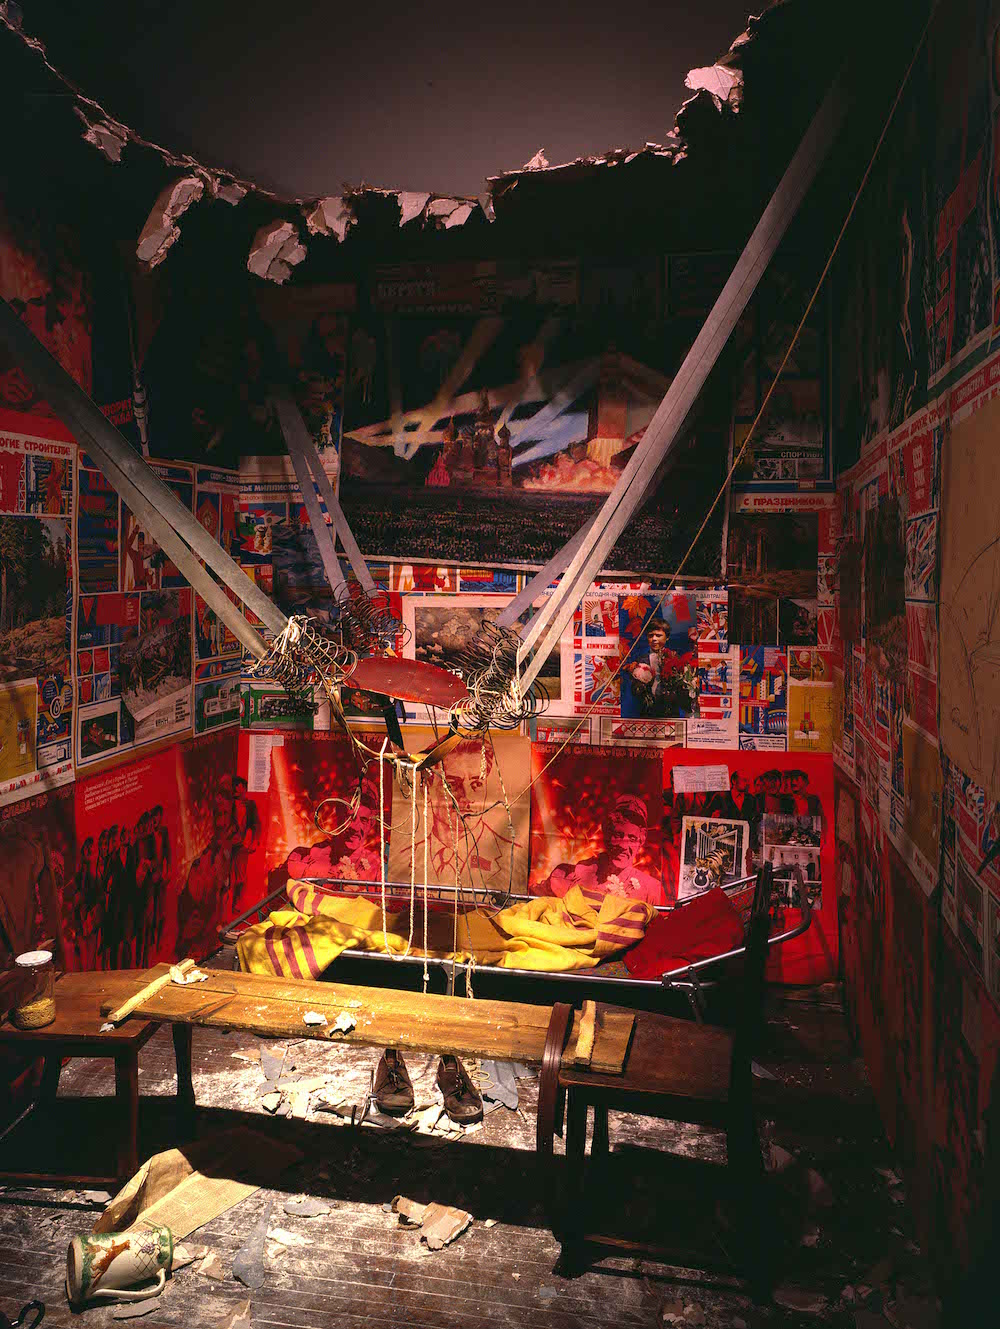 <em>The Man Who Flew Into Space From His Apartment</em> (1985) by Ilya Kabakov, on display at Tate Modern